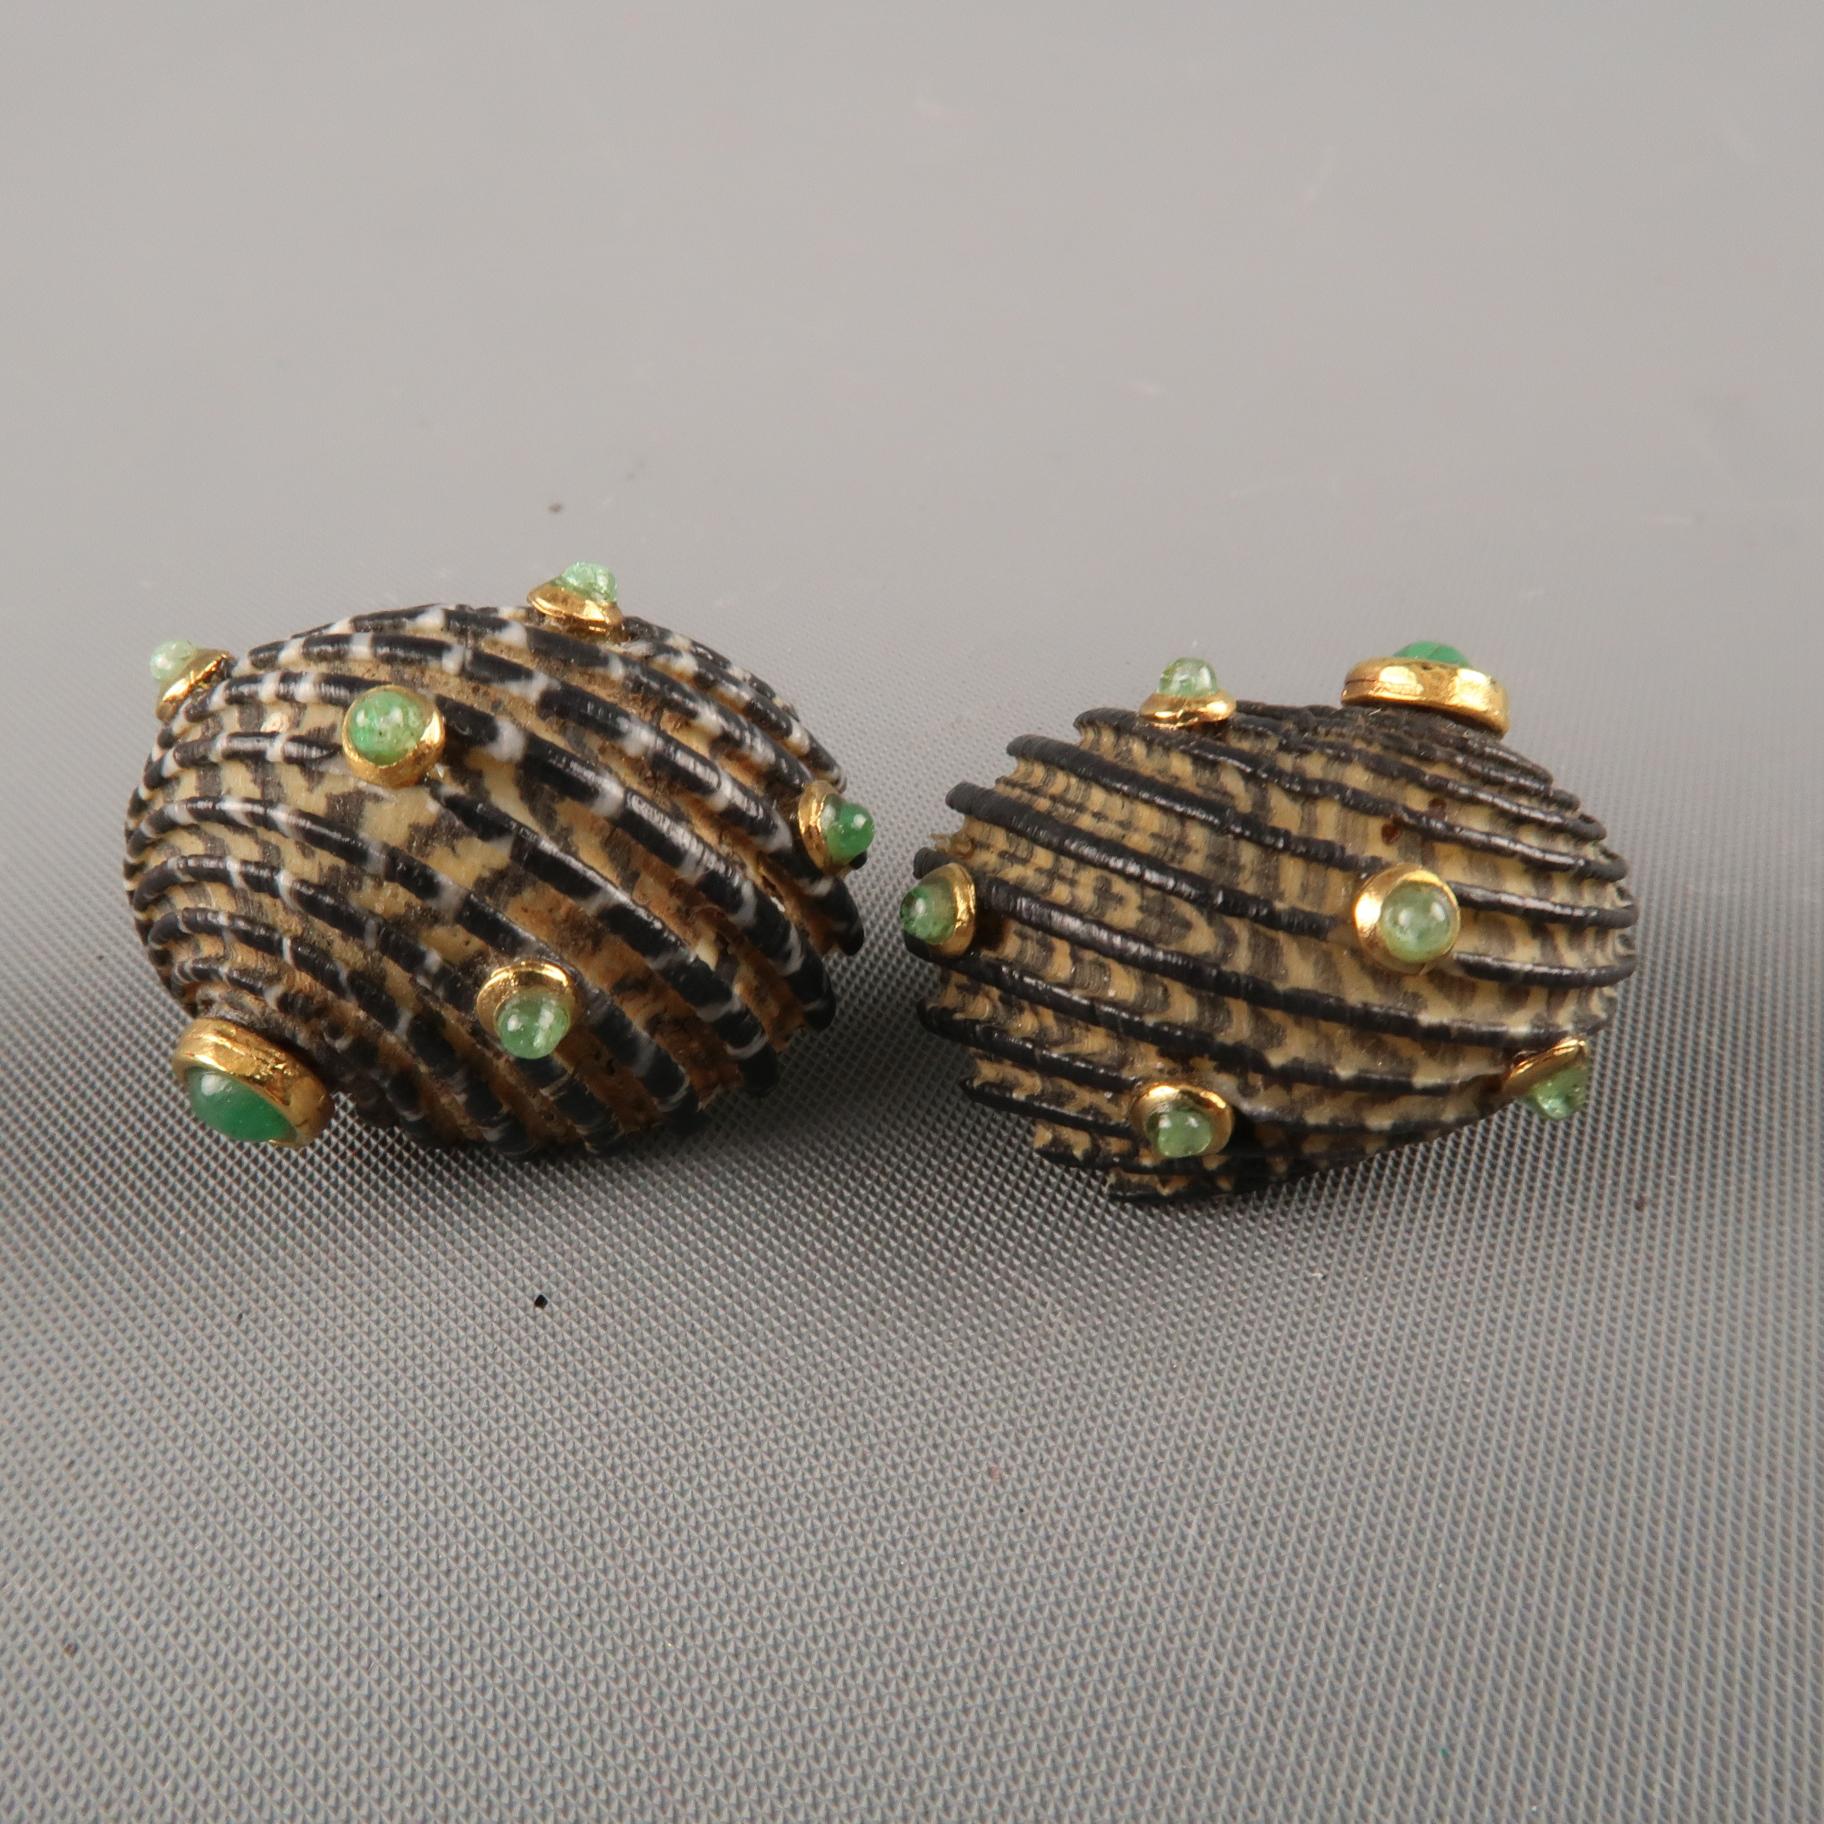 L'OREE du BOIS clip on earrings feature sea shells with gold tone encased green stone embellishments throughout. Made in France.
 
Good Pre-Owned Condition.
 
1 x 0.75 in.